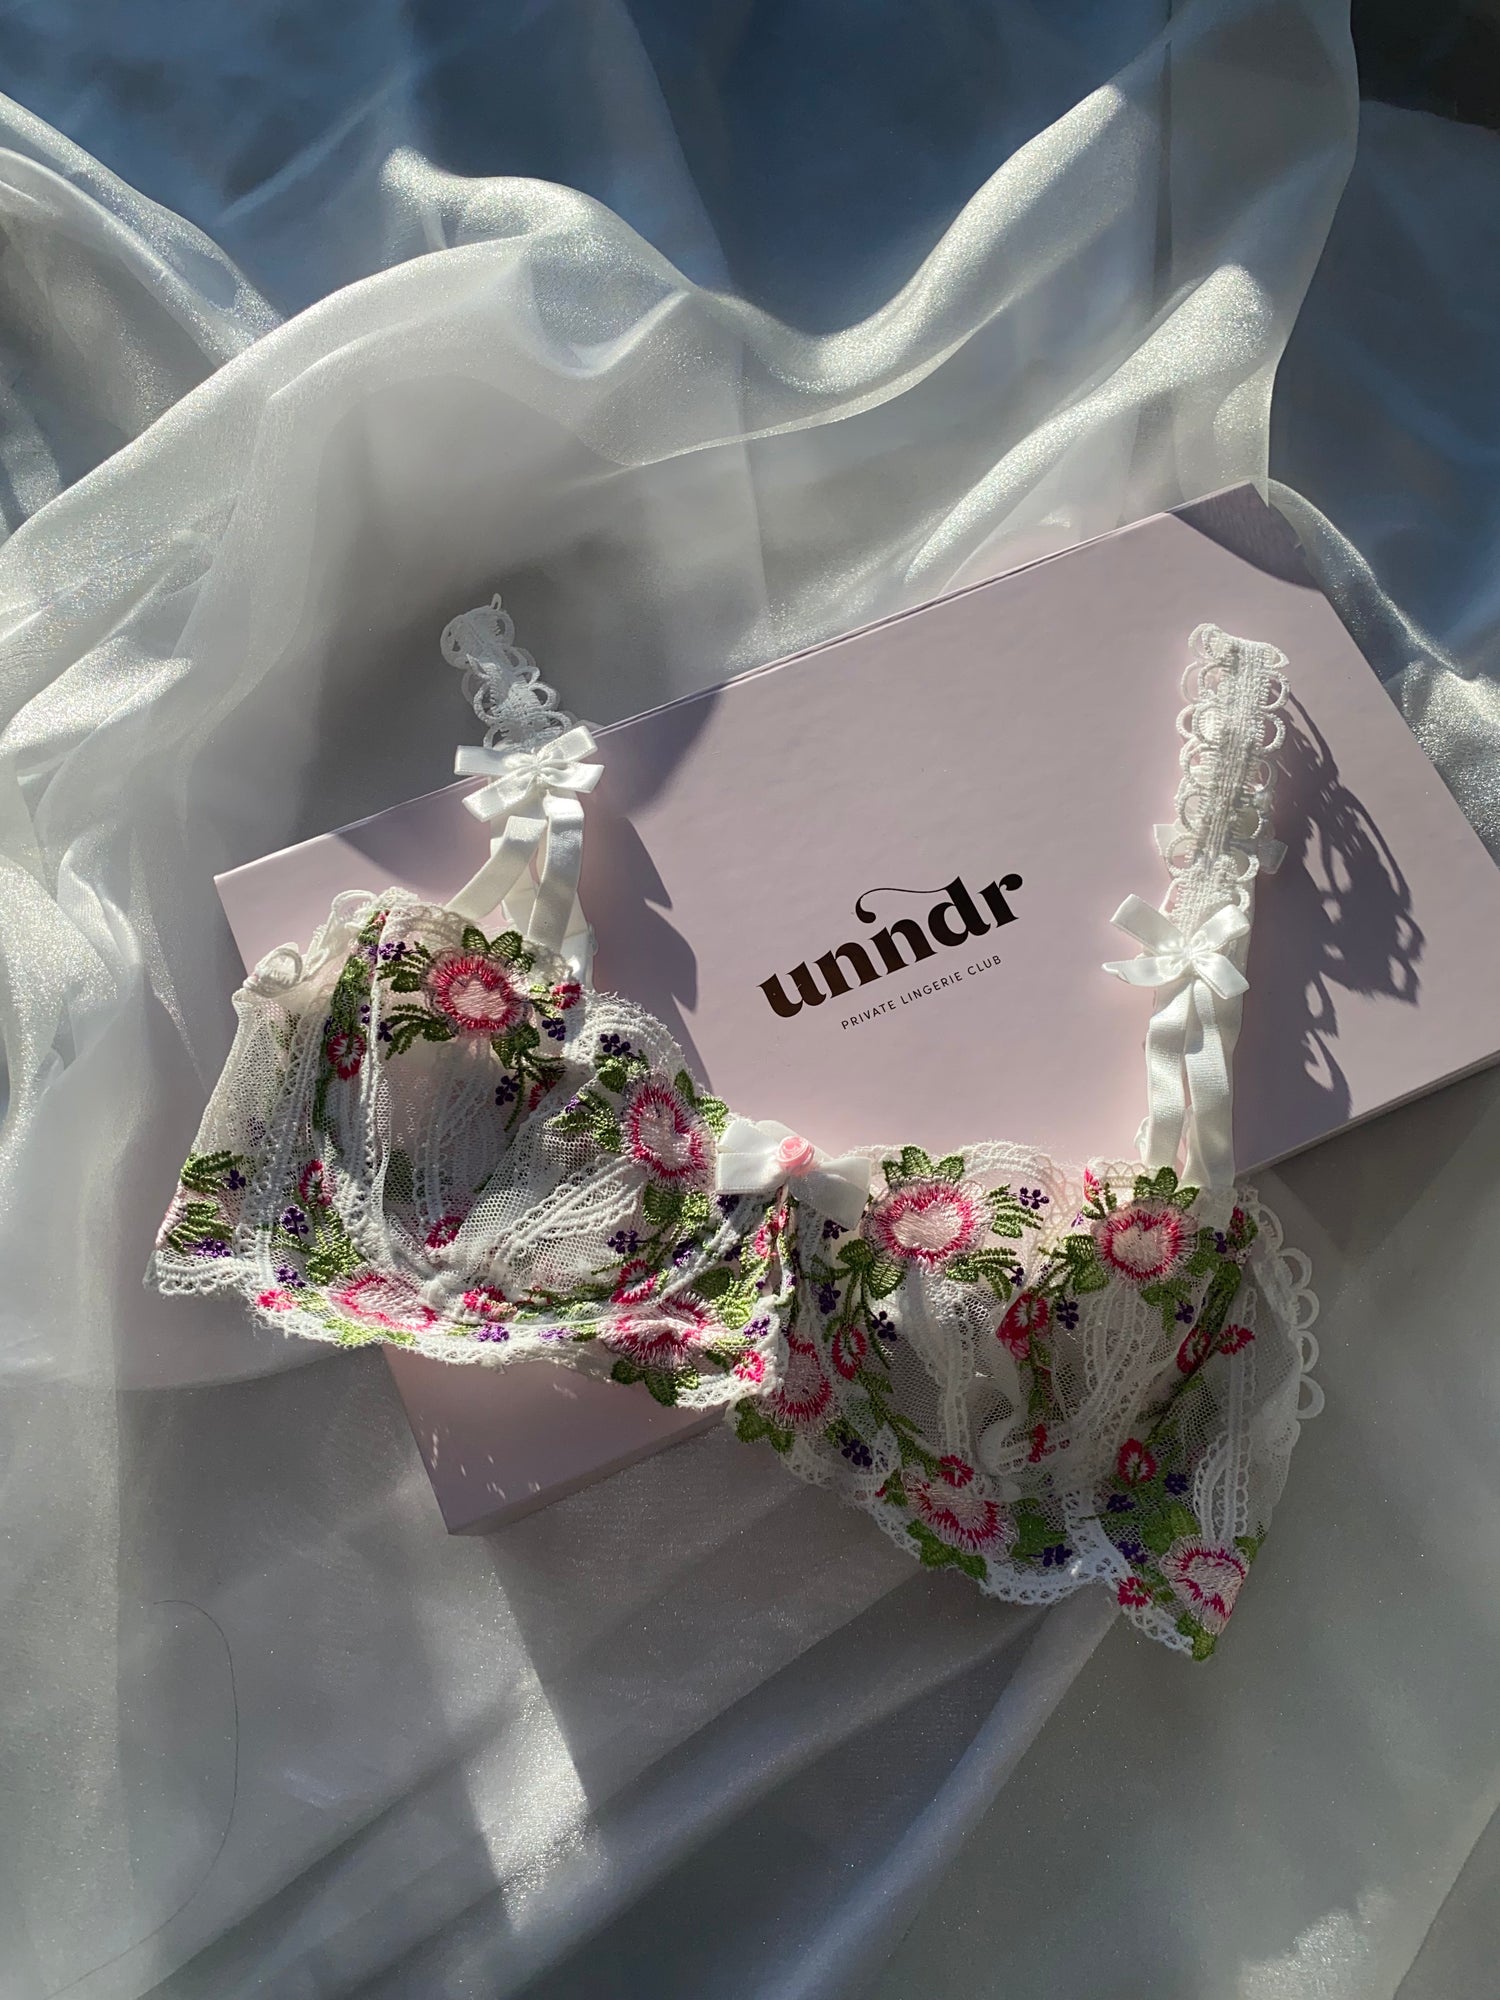 Bras - Find A Subscription Box